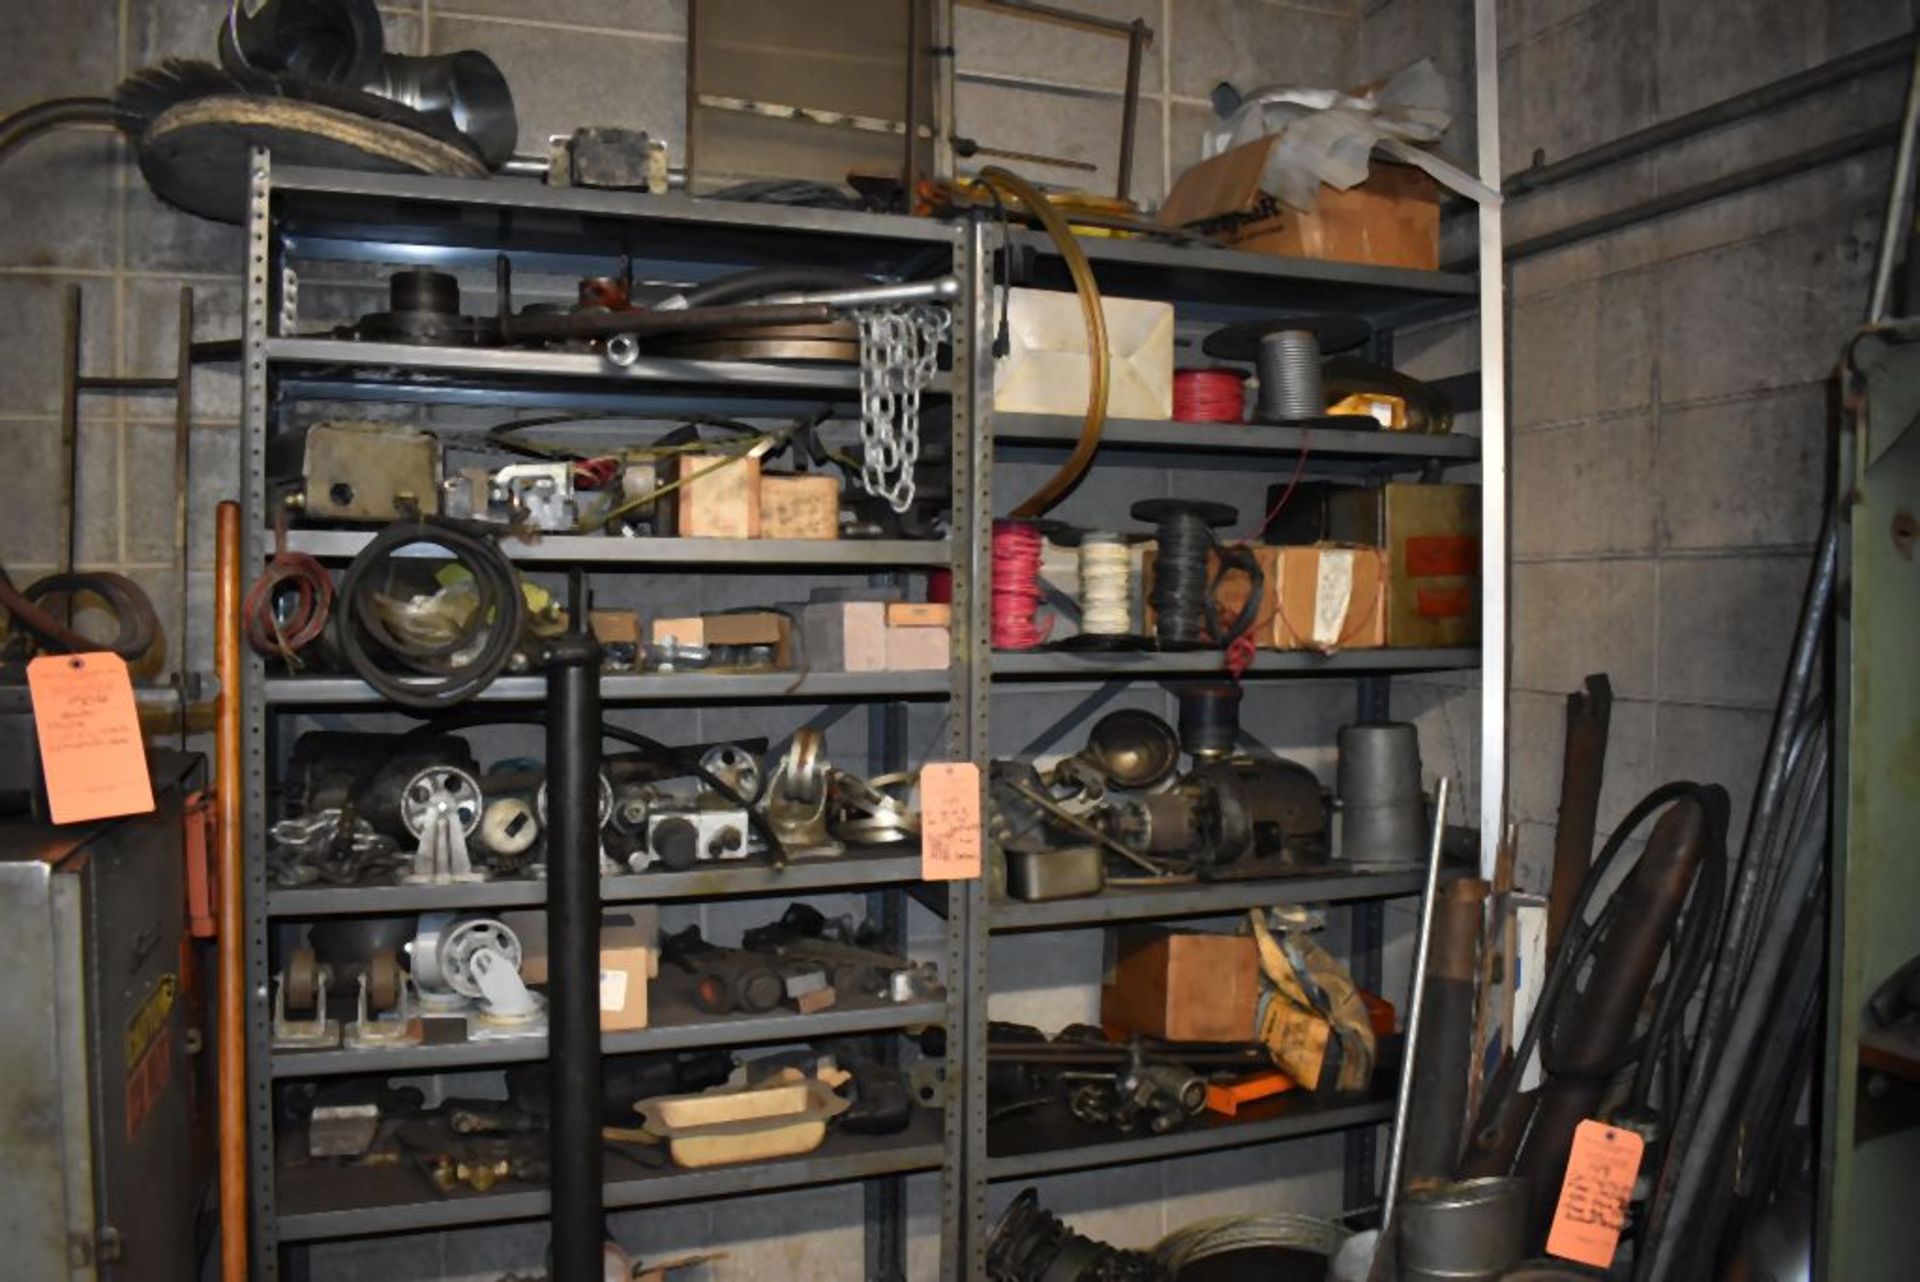 (2) SHELVING UNITS WITH CONTENTS - INCLUDES PIPE CUTTER, VISE, WIRE AND STEEL CASTERS